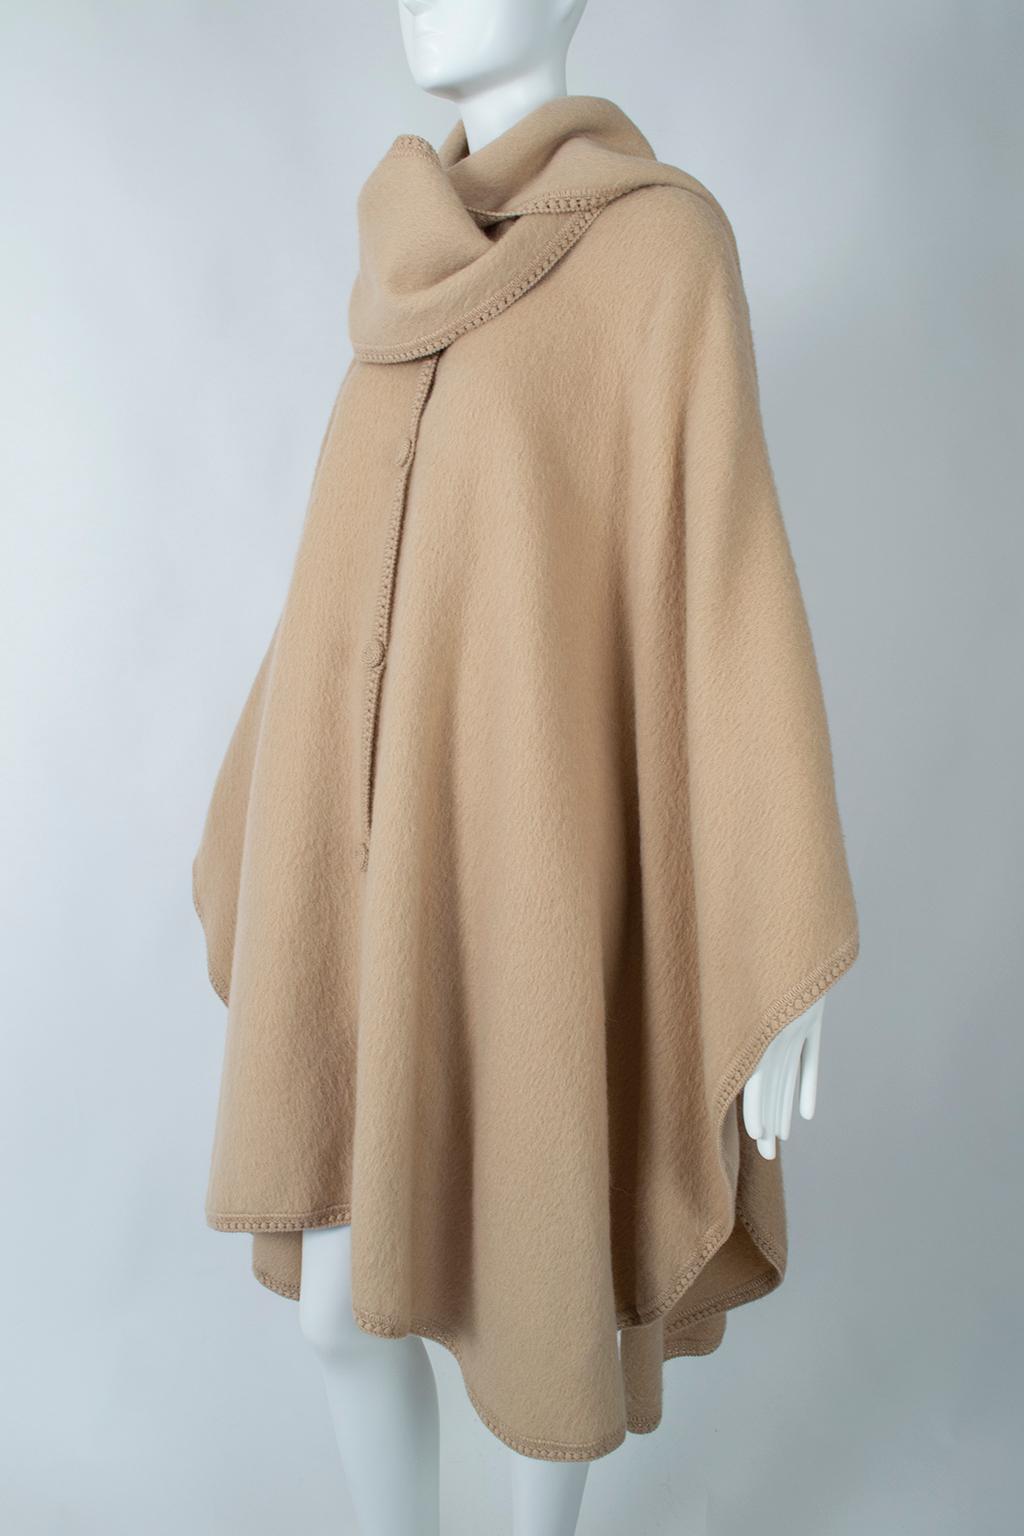 Women's Camel Peruvian Alpaca Poncho with Attached Scarf, Jacome Estate - One Size, 1960